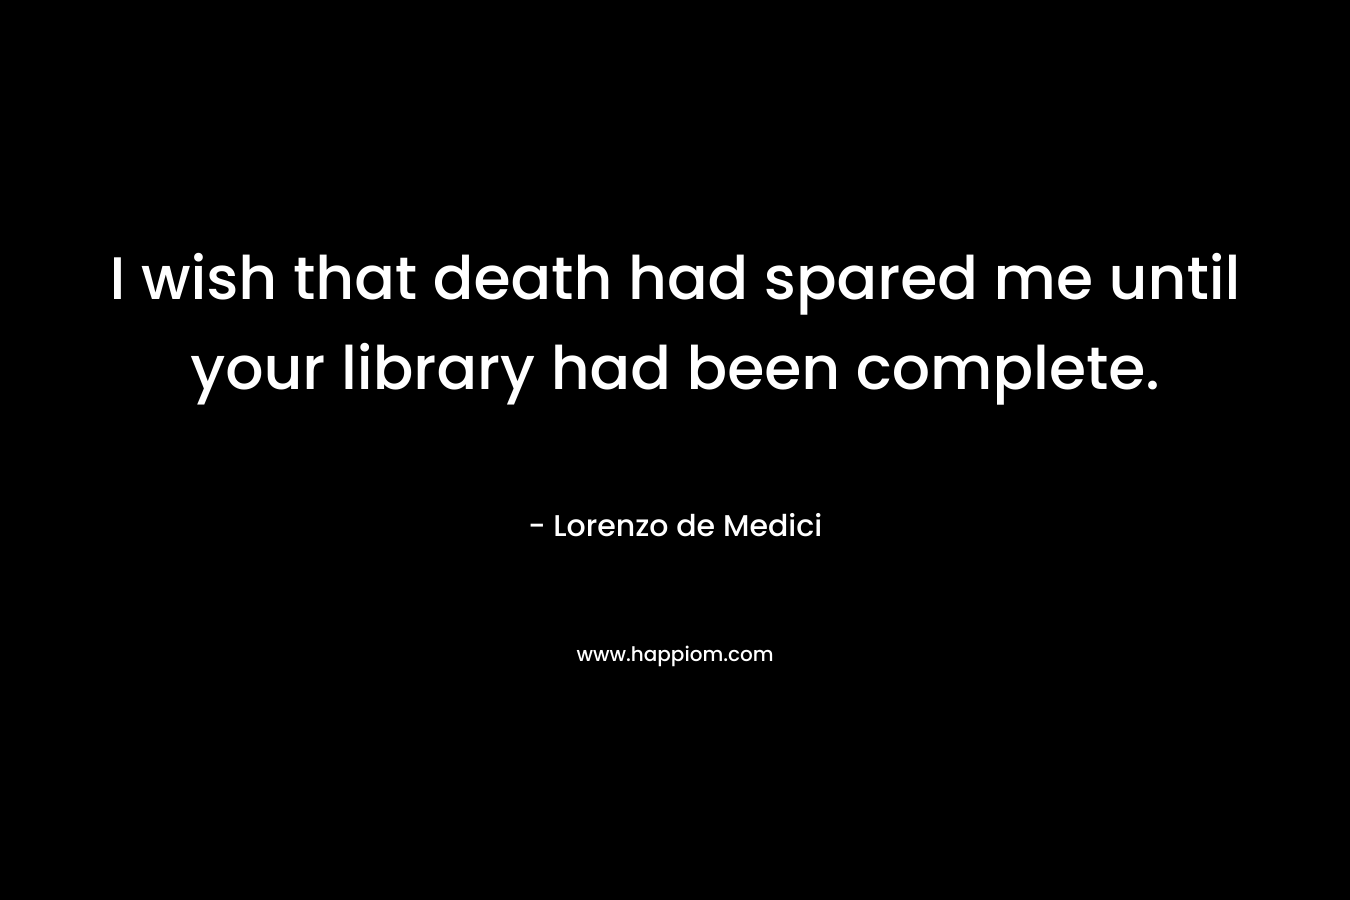 I wish that death had spared me until your library had been complete. – Lorenzo de Medici